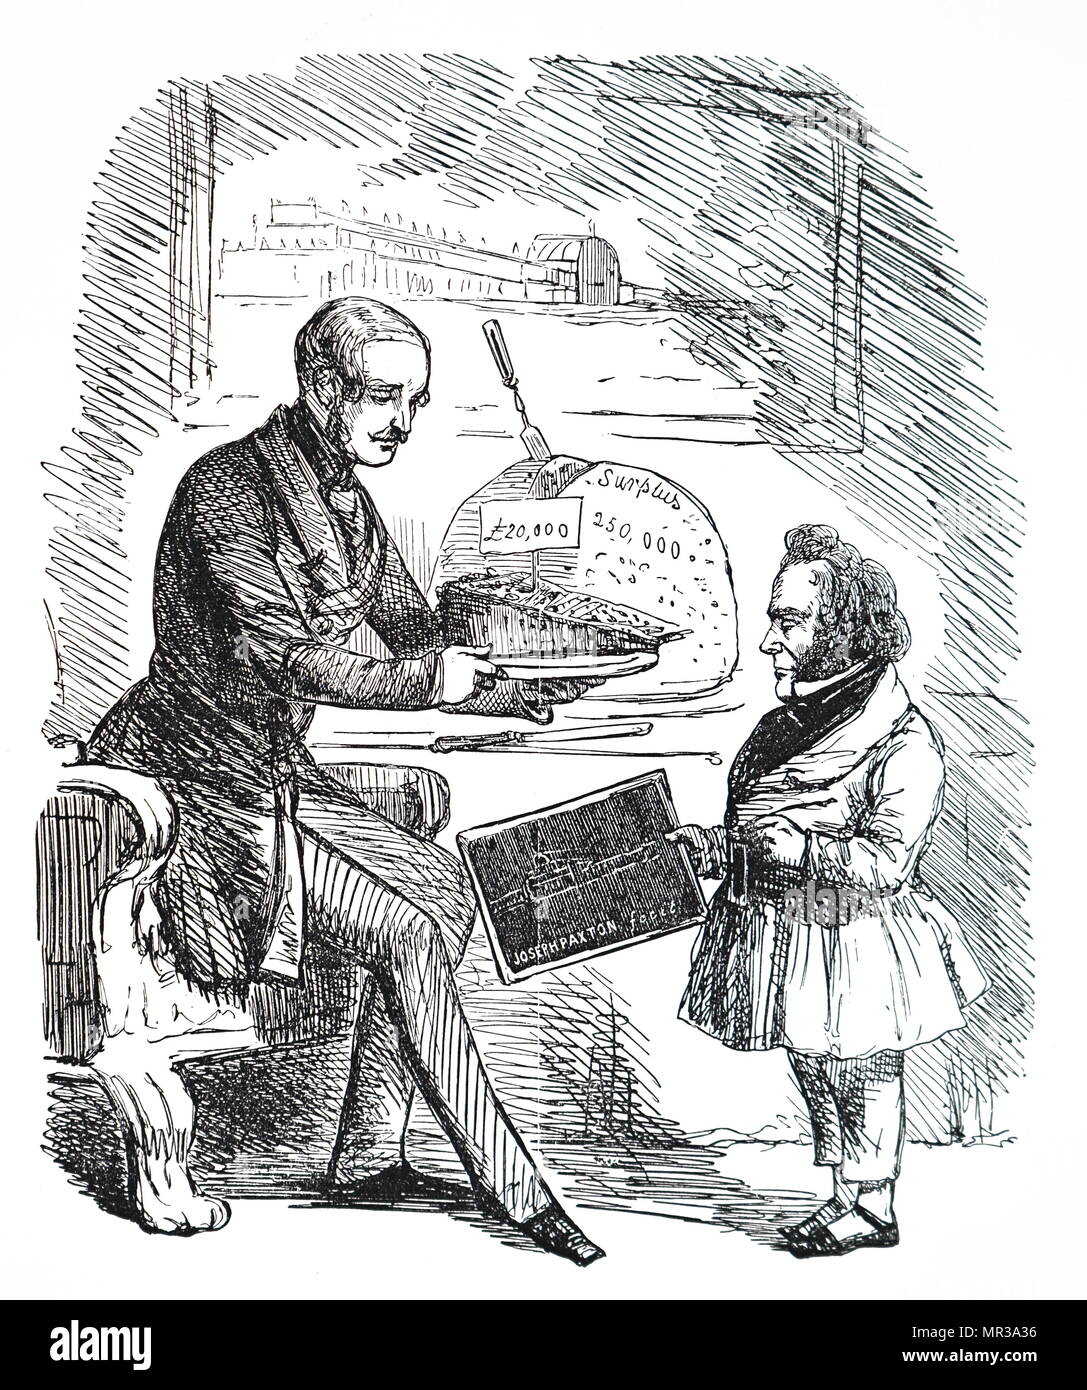 Cartoon depicting Prince Albert handing Joseph Paxton a £20,000 slice of 'Solid Pudding' from the surplus from the Great Exhibition. Albert, Prince Consort (1819-1861) the husband and consort of Queen Victoria. Joseph Paxton (803-1865) an English gardener, architect and Member of Parliament who designed the Crystal Palace. Dated 19th century Stock Photo